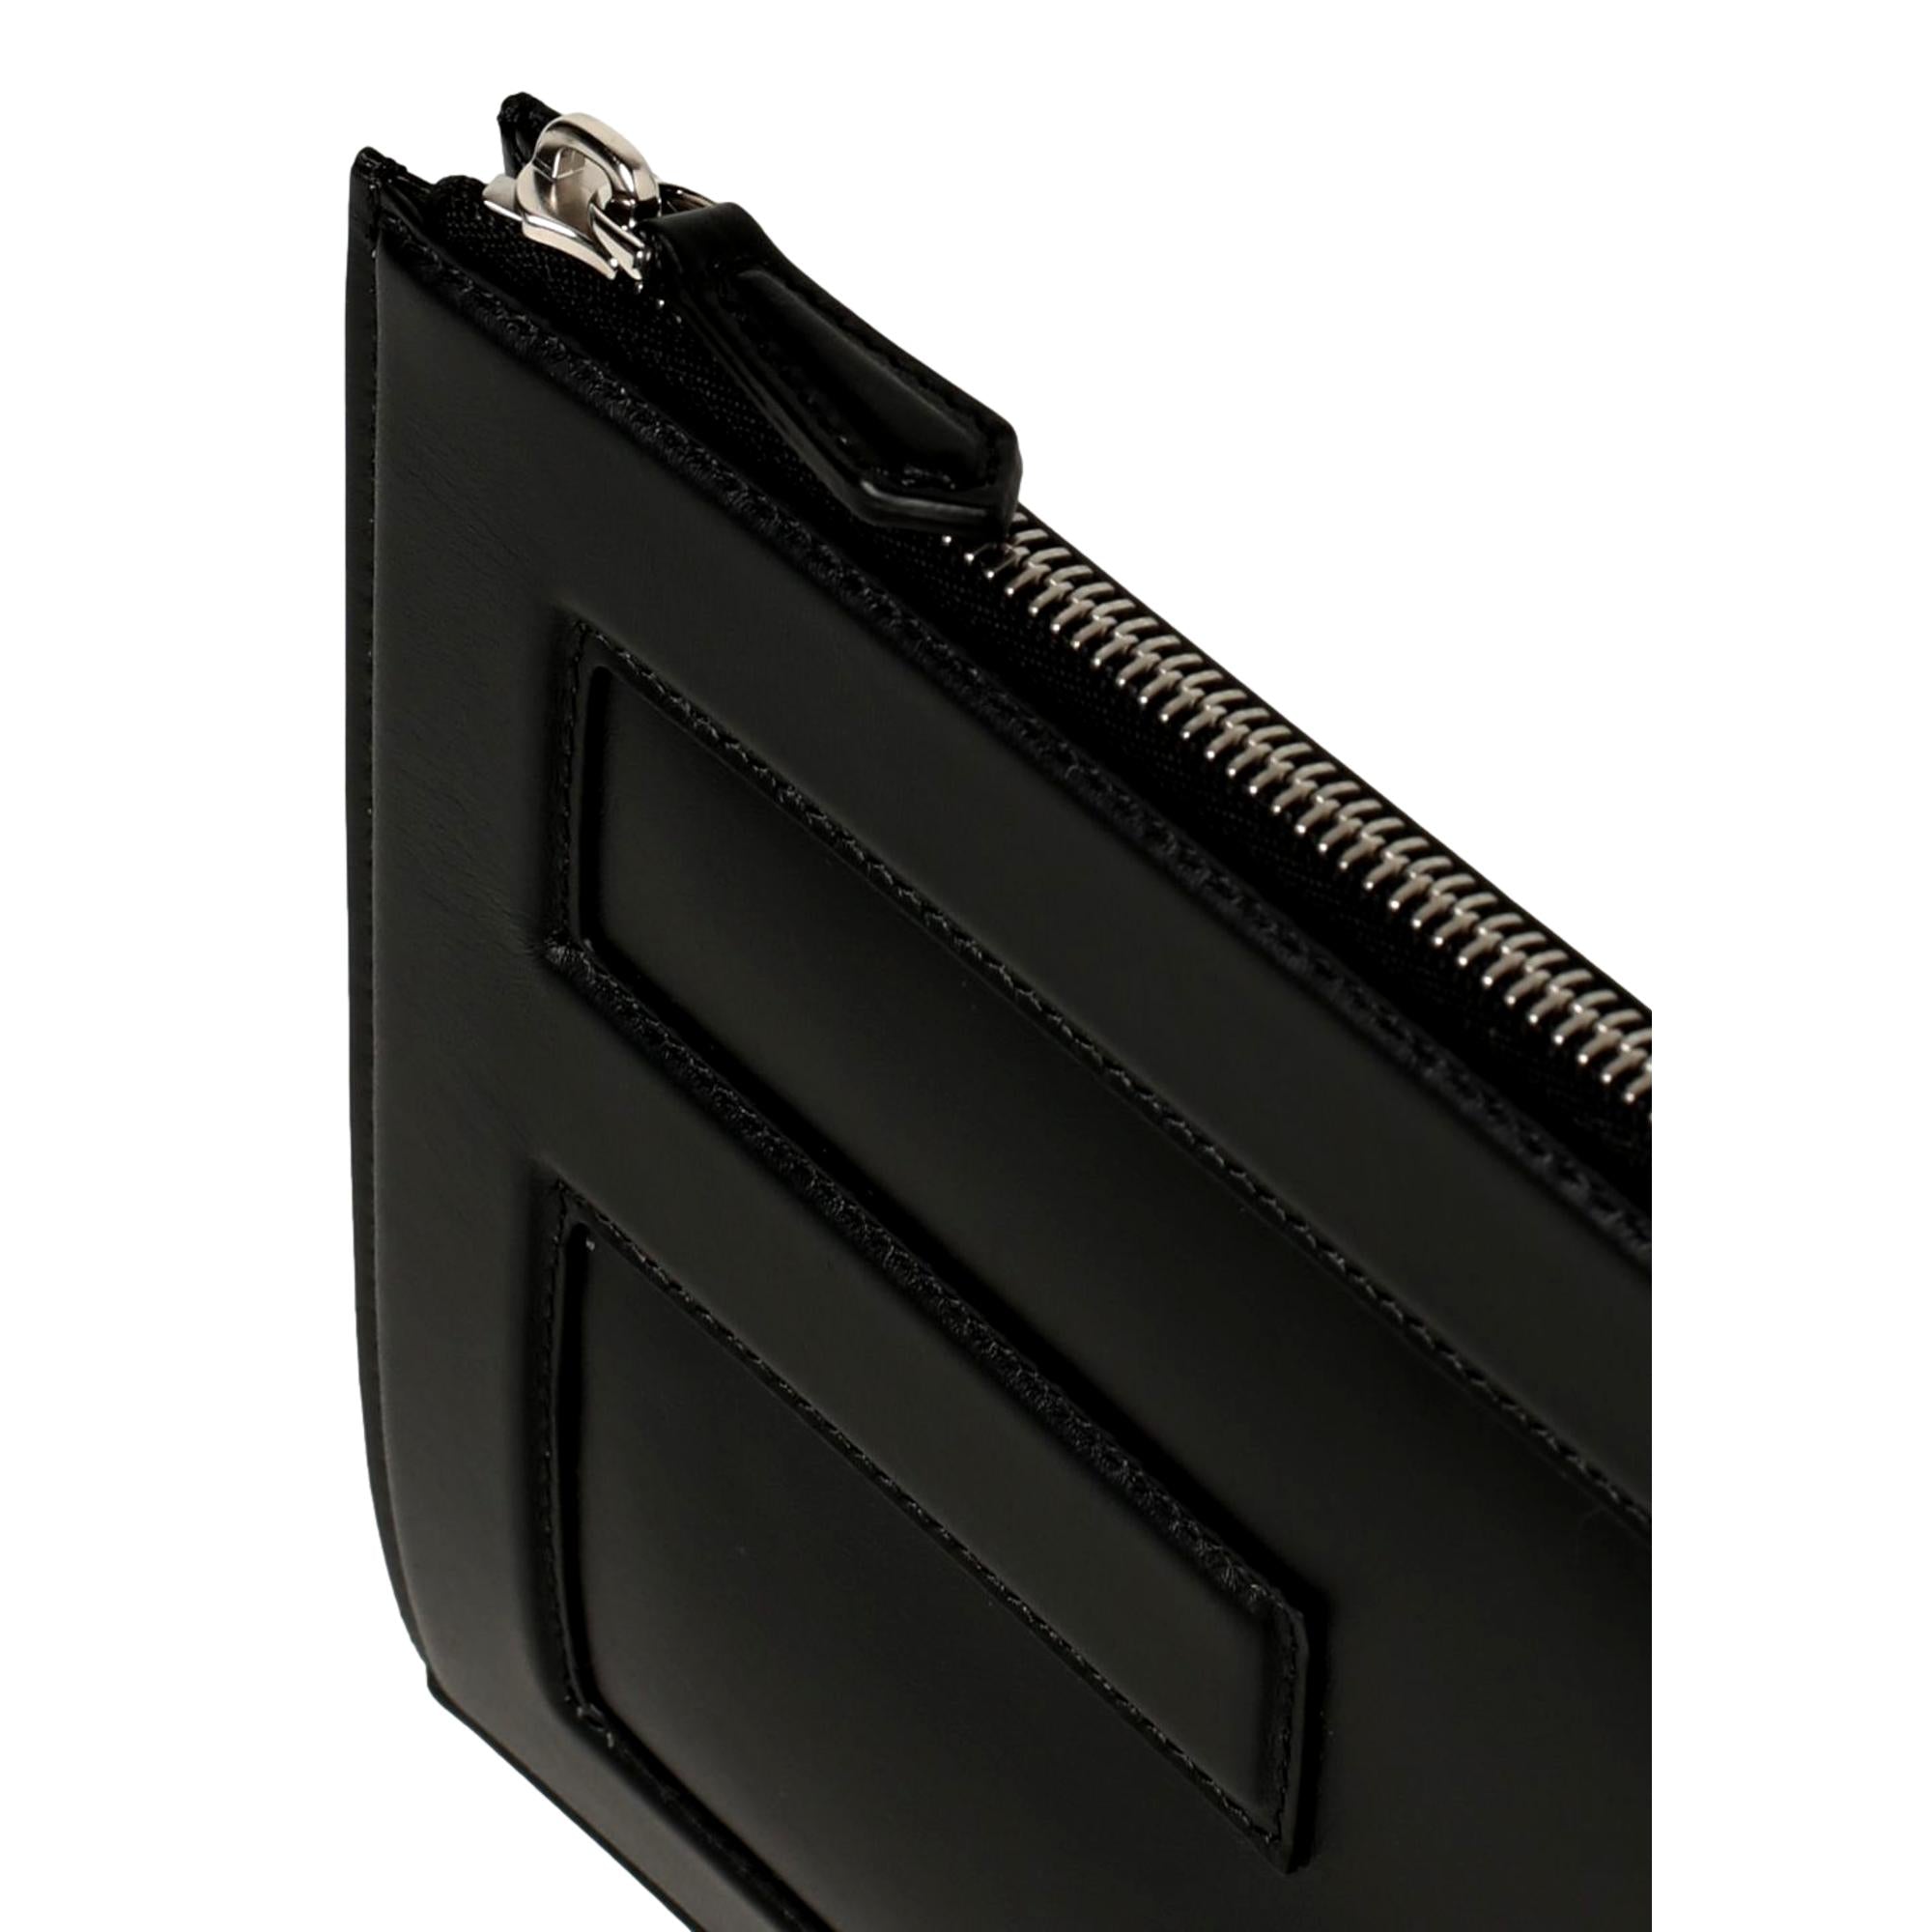 Fendi Baguette Black Calf Leather Embossed Clutch 7N0115 at_Queen_Bee_of_Beverly_Hills